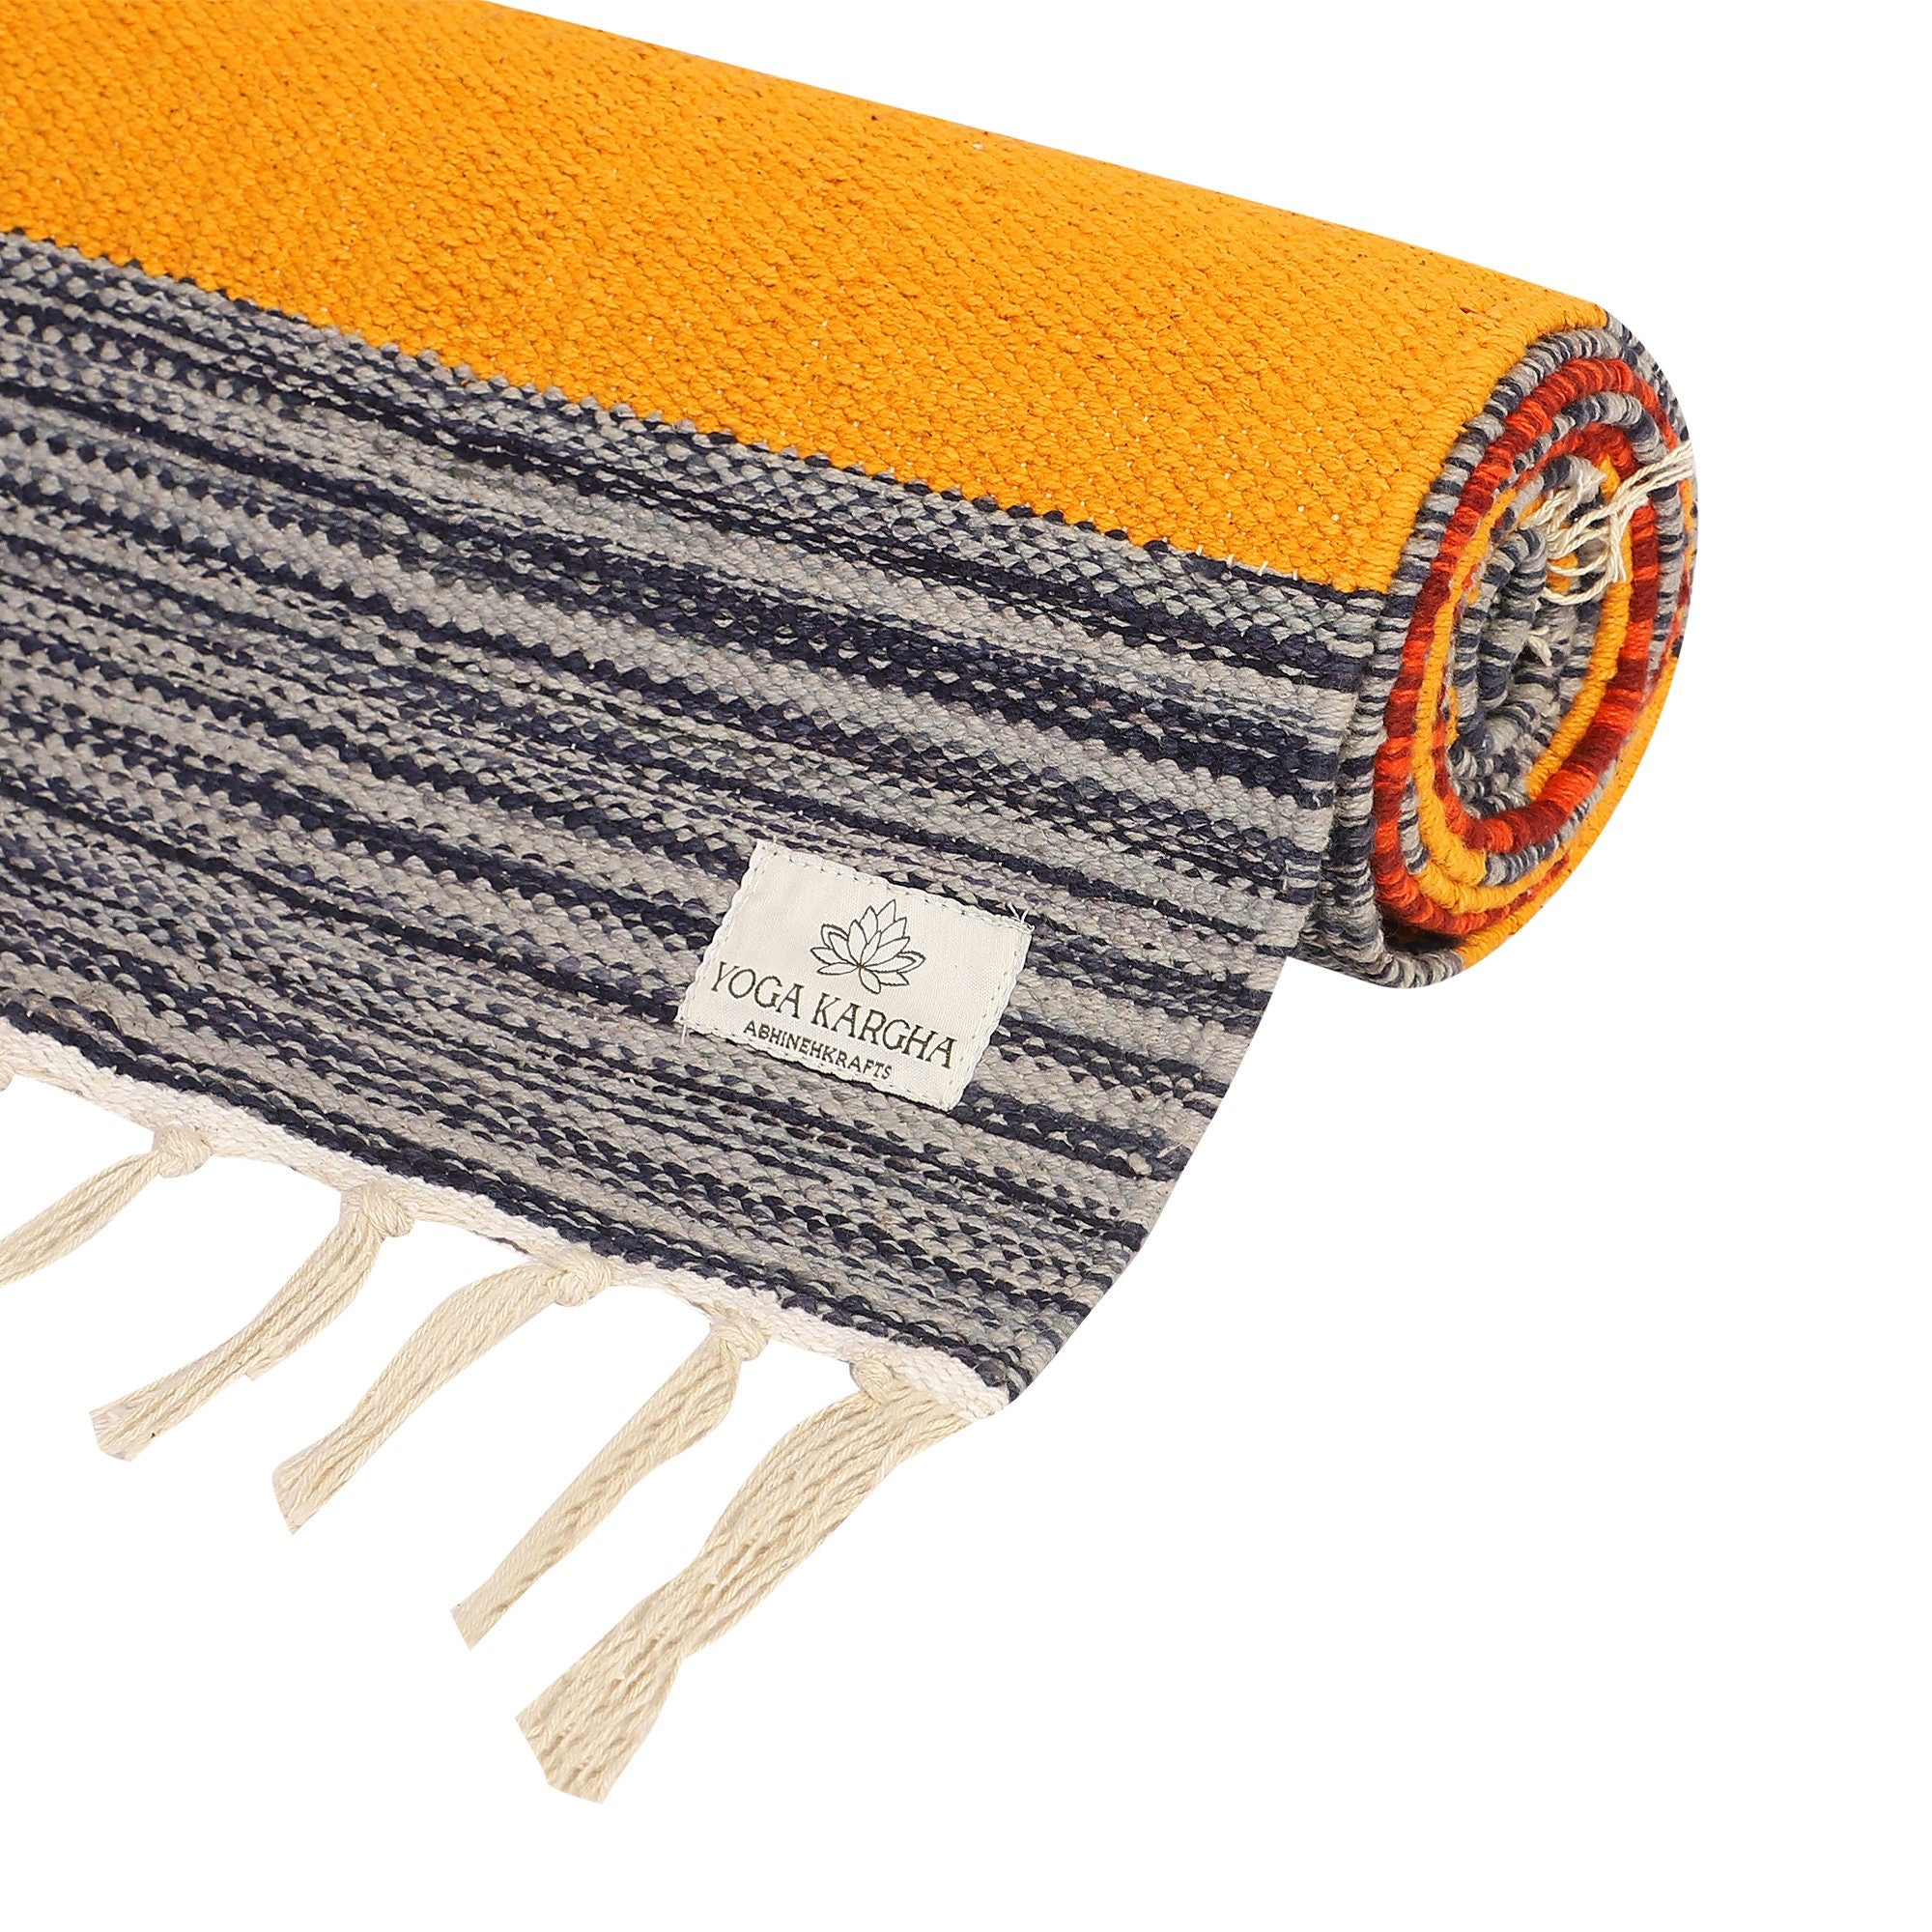 Handwoven Cotton Mat for Yoga and Meditation or Home Decor - Amsterdam